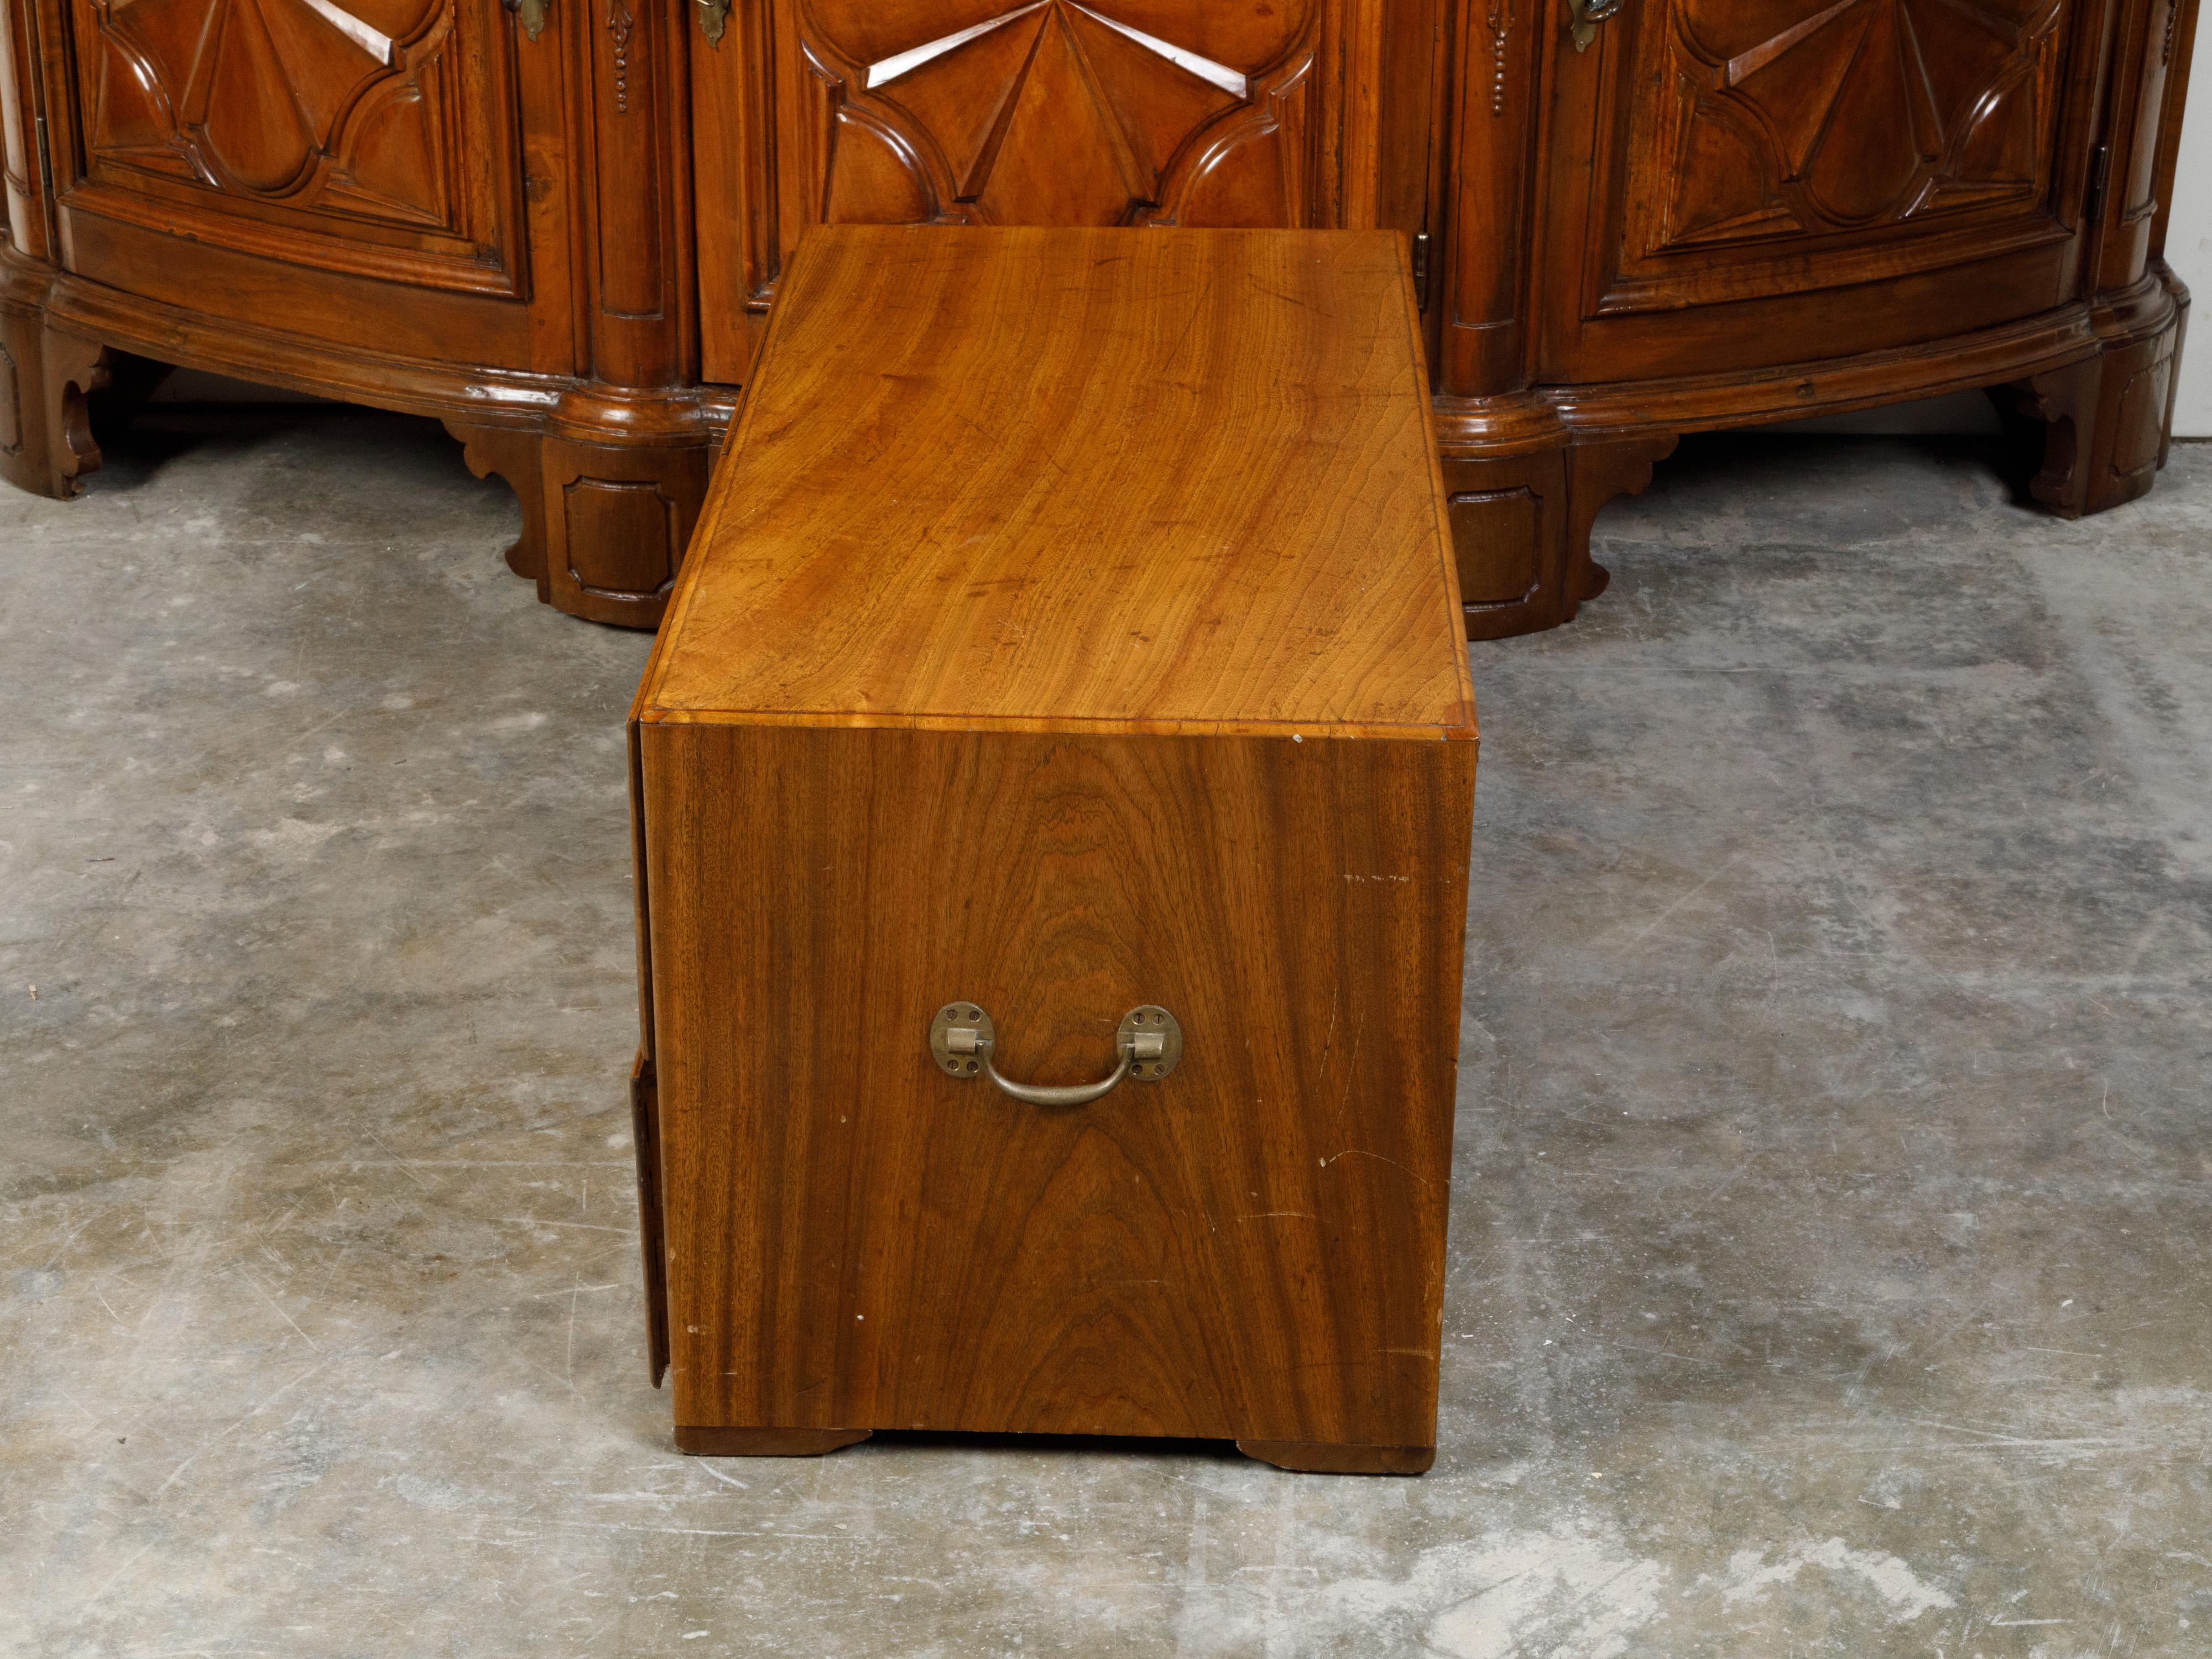 English Campaign 19th Century Camphor Wood Low Chest with Inset Brass Hardware For Sale 2